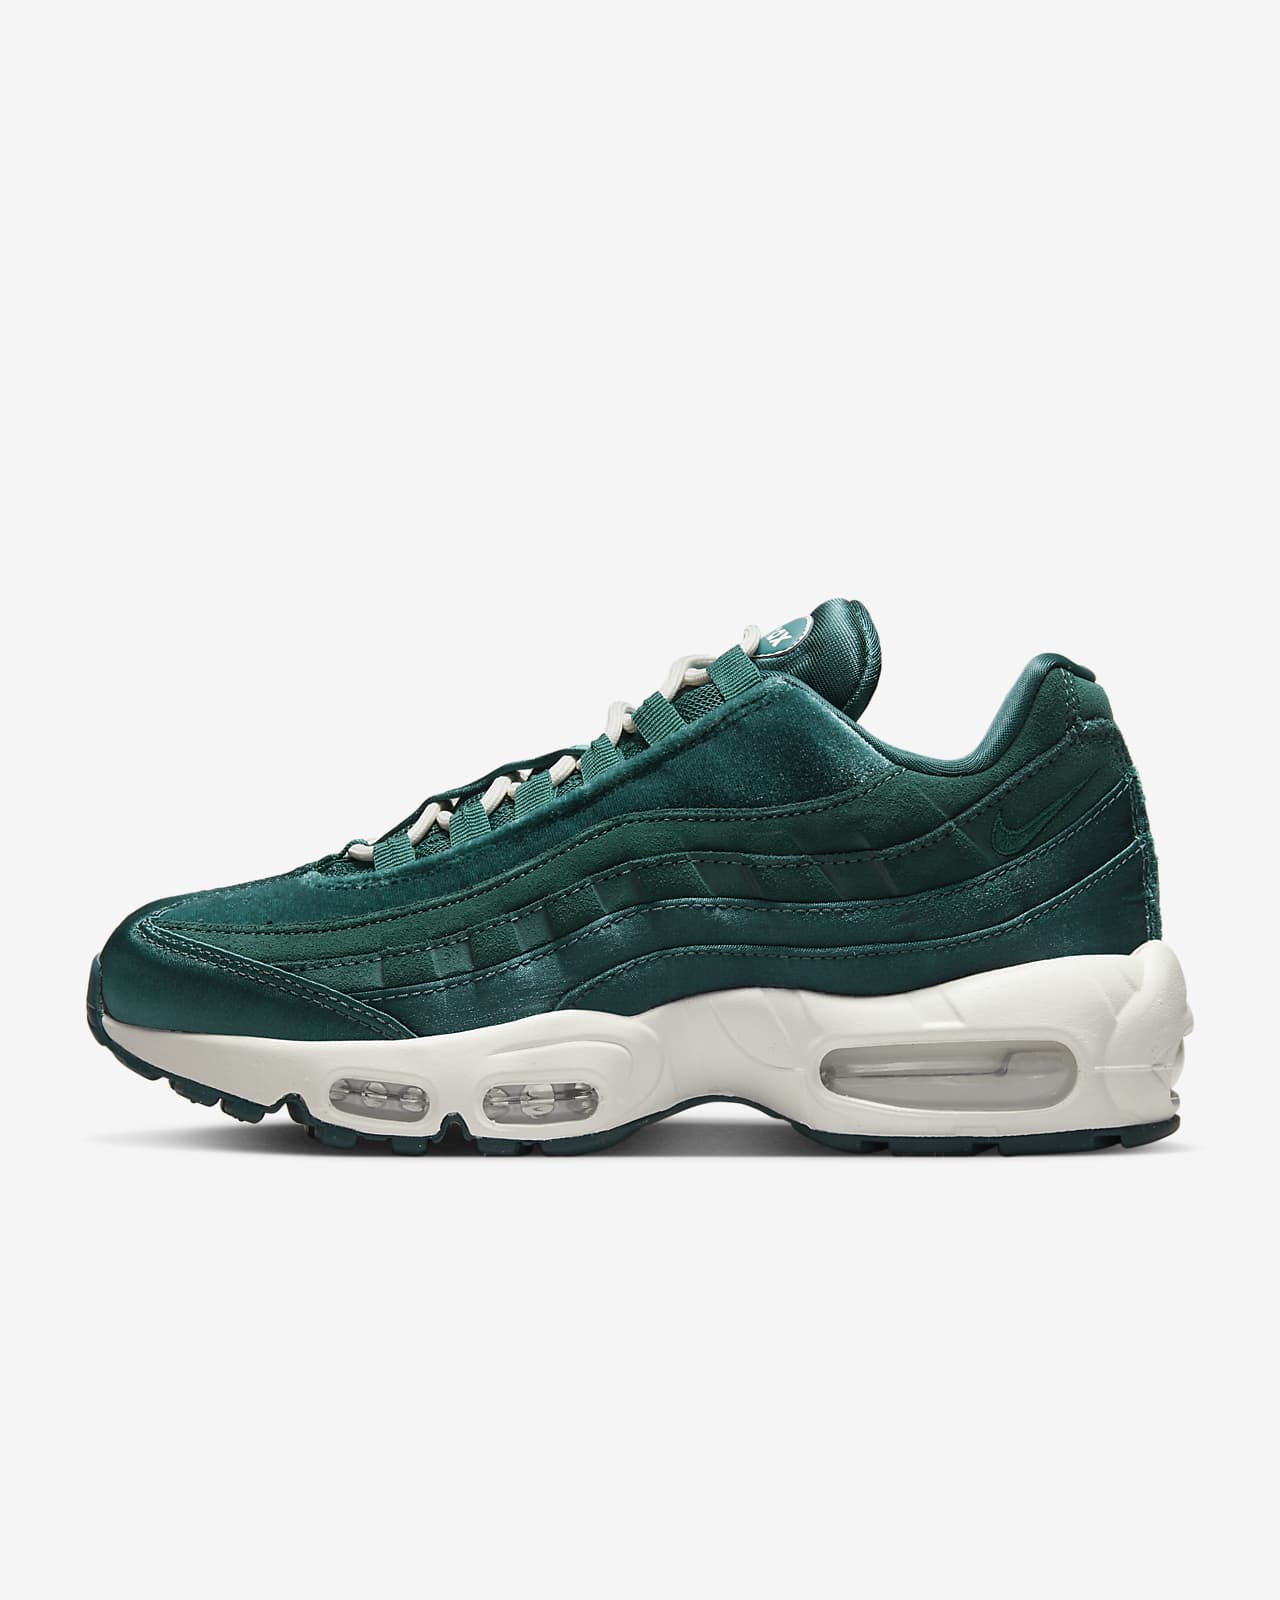 Funeral government Institute Nike Air Max 95 Women's Shoes. Nike.com